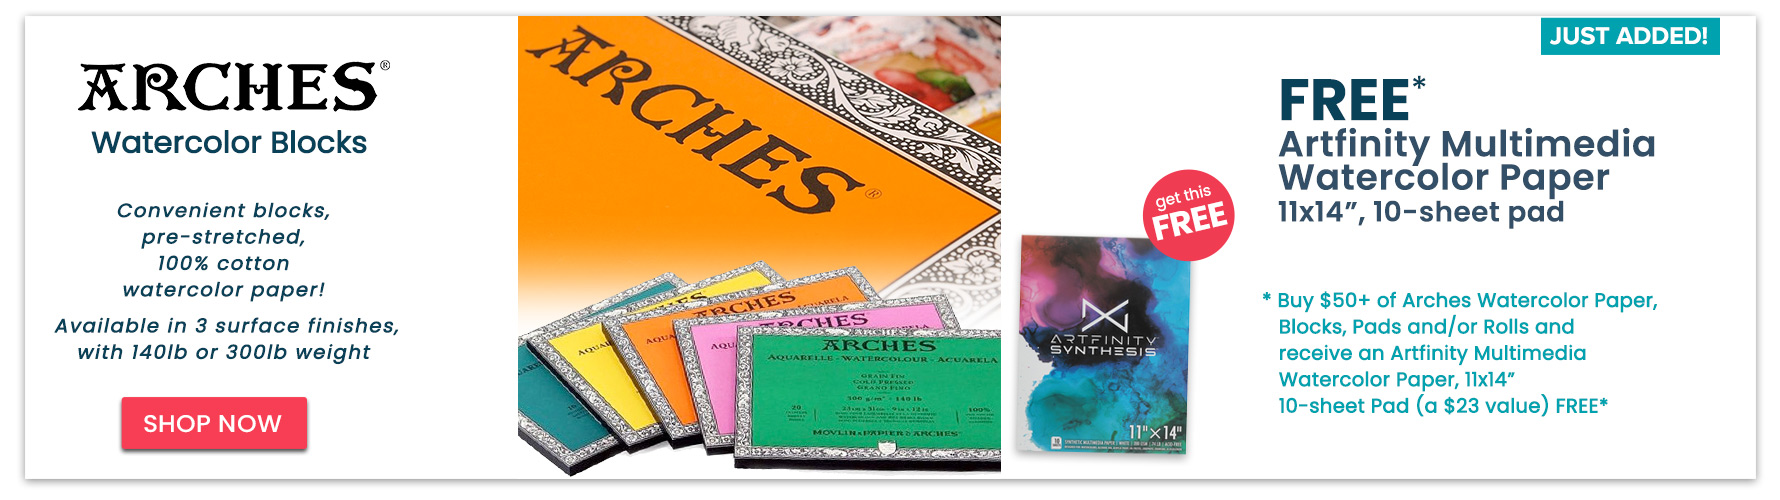 Arches Watercolor Blocks + Special Offer